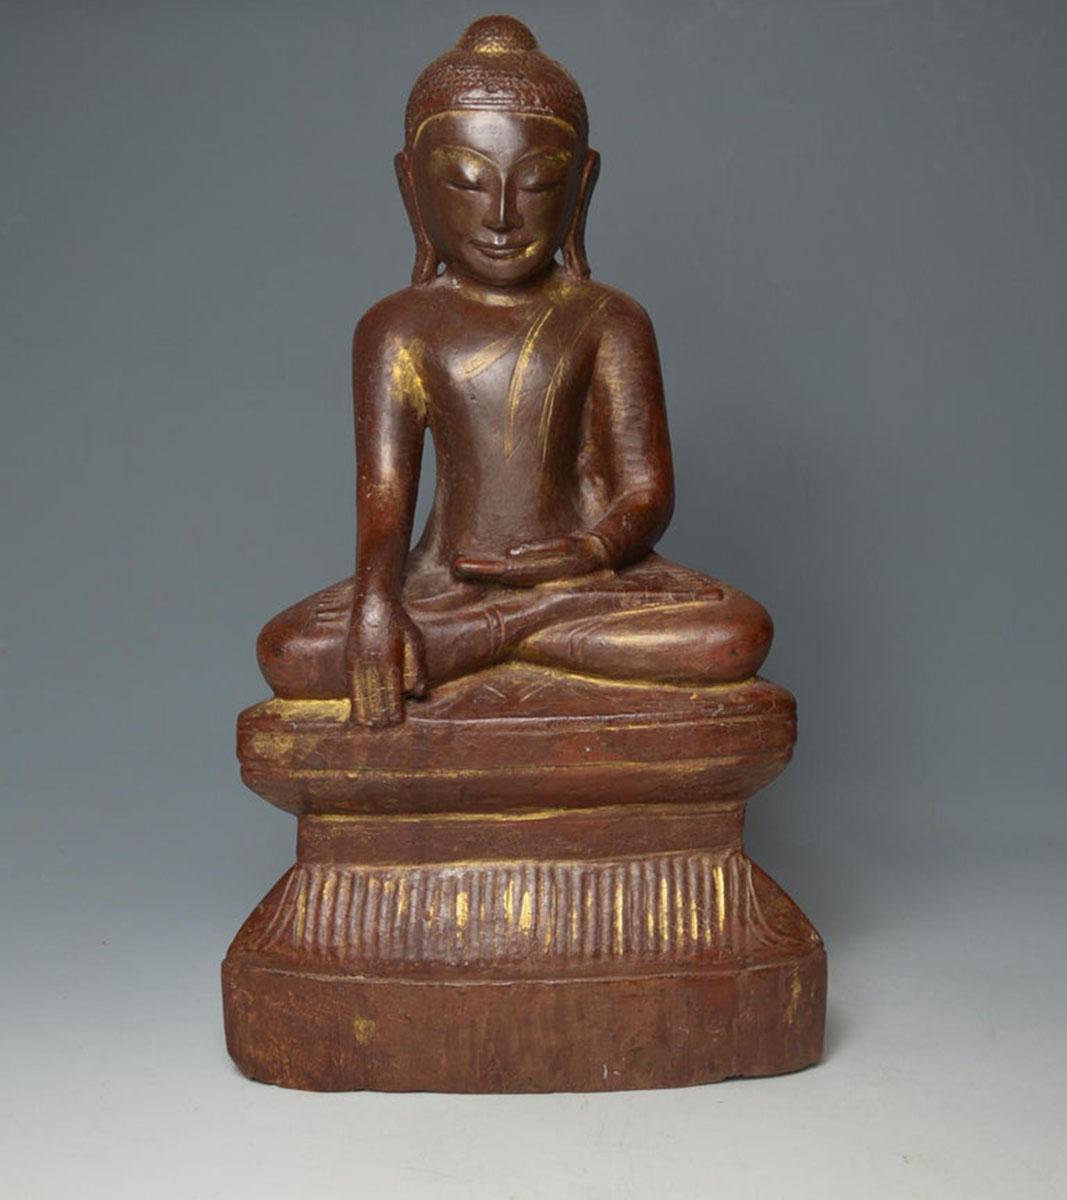 A superb large Burmese Shan wood Buddha, Circa 18th / 19th century
Beautiful and elegant example in carved hard wood with lacquer and gold gilt, the Buddha seated in the meditation posture with hands held in the Bhumisparsha mudra raised on a